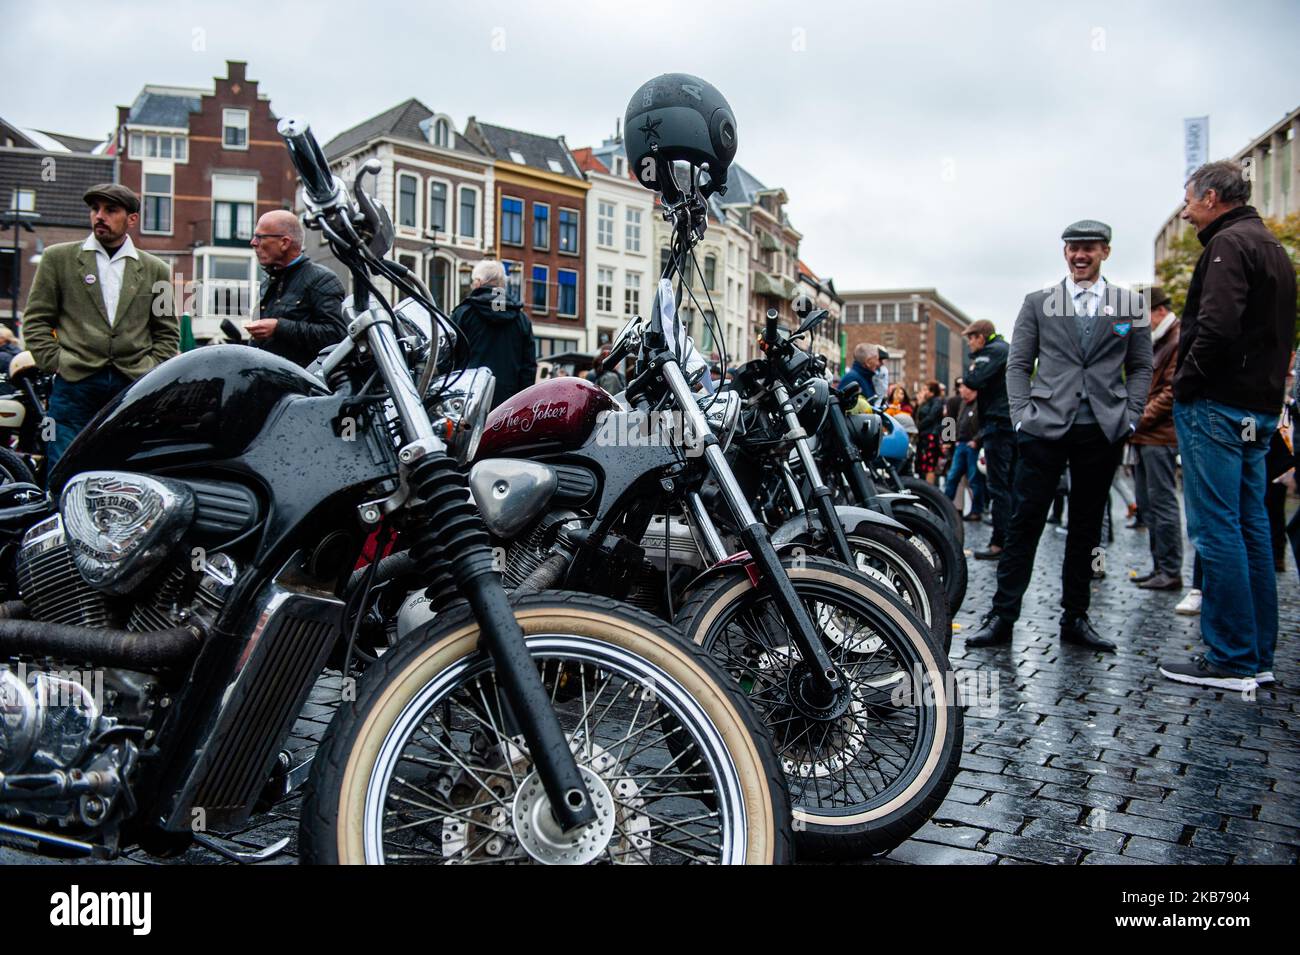 The Distinguished Gentleman's Ride Was Held In Nijmegen, Netherlands, on September 29, 2019. The Distinguished Gentleman's Ride unites classic and vintage style motorcycle riders all over the world to raise funds and awareness for prostate cancer research and men's mental health. (Photo by Romy Arroyo Fernandez/NurPhoto) Stock Photo